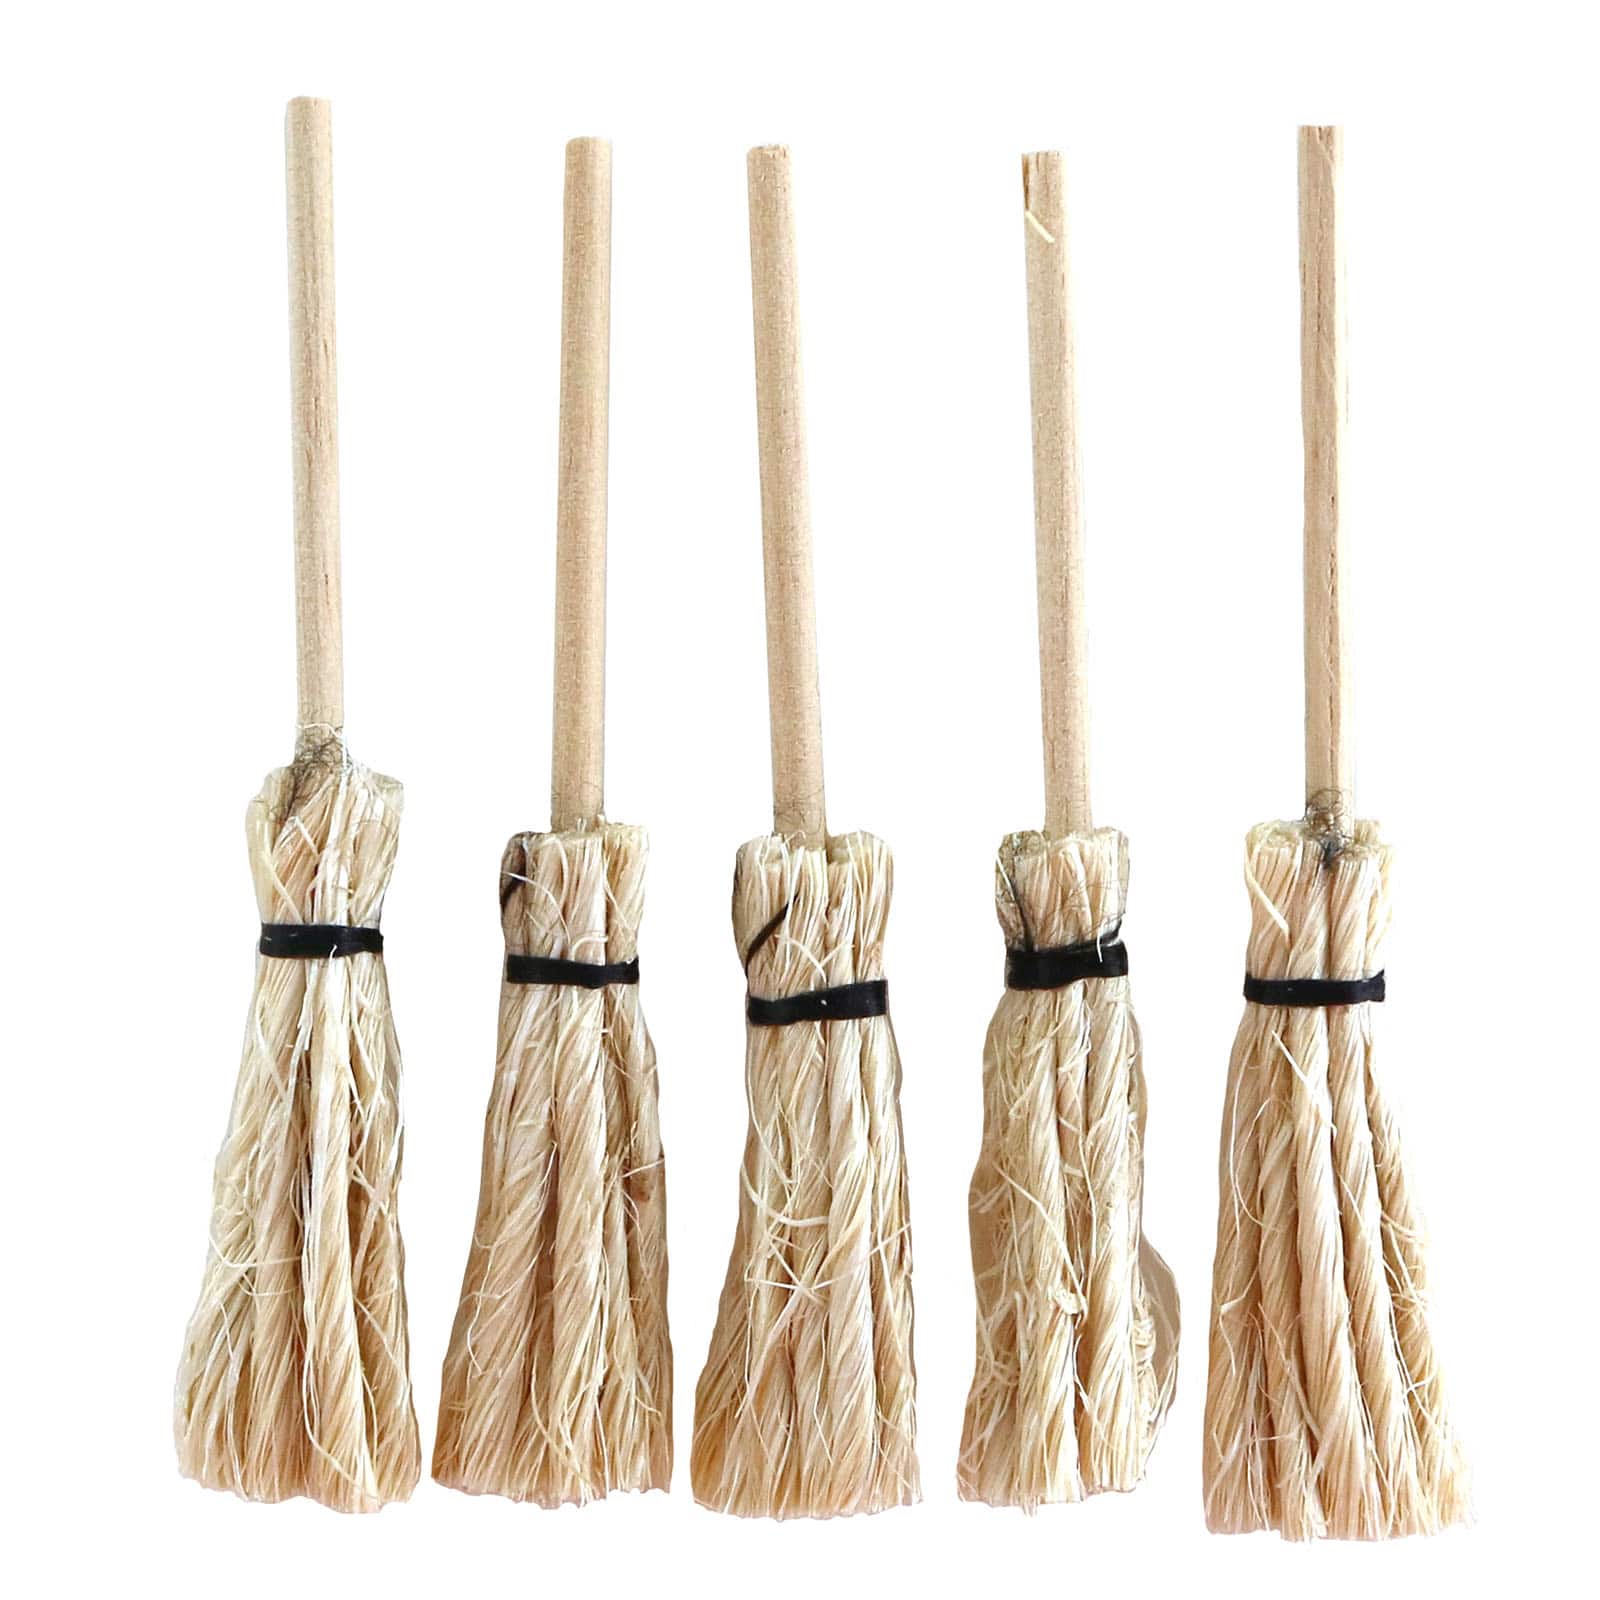 Find the Sparrow Innovations Miniatures Wood Brooms, 5 Count at Michaels